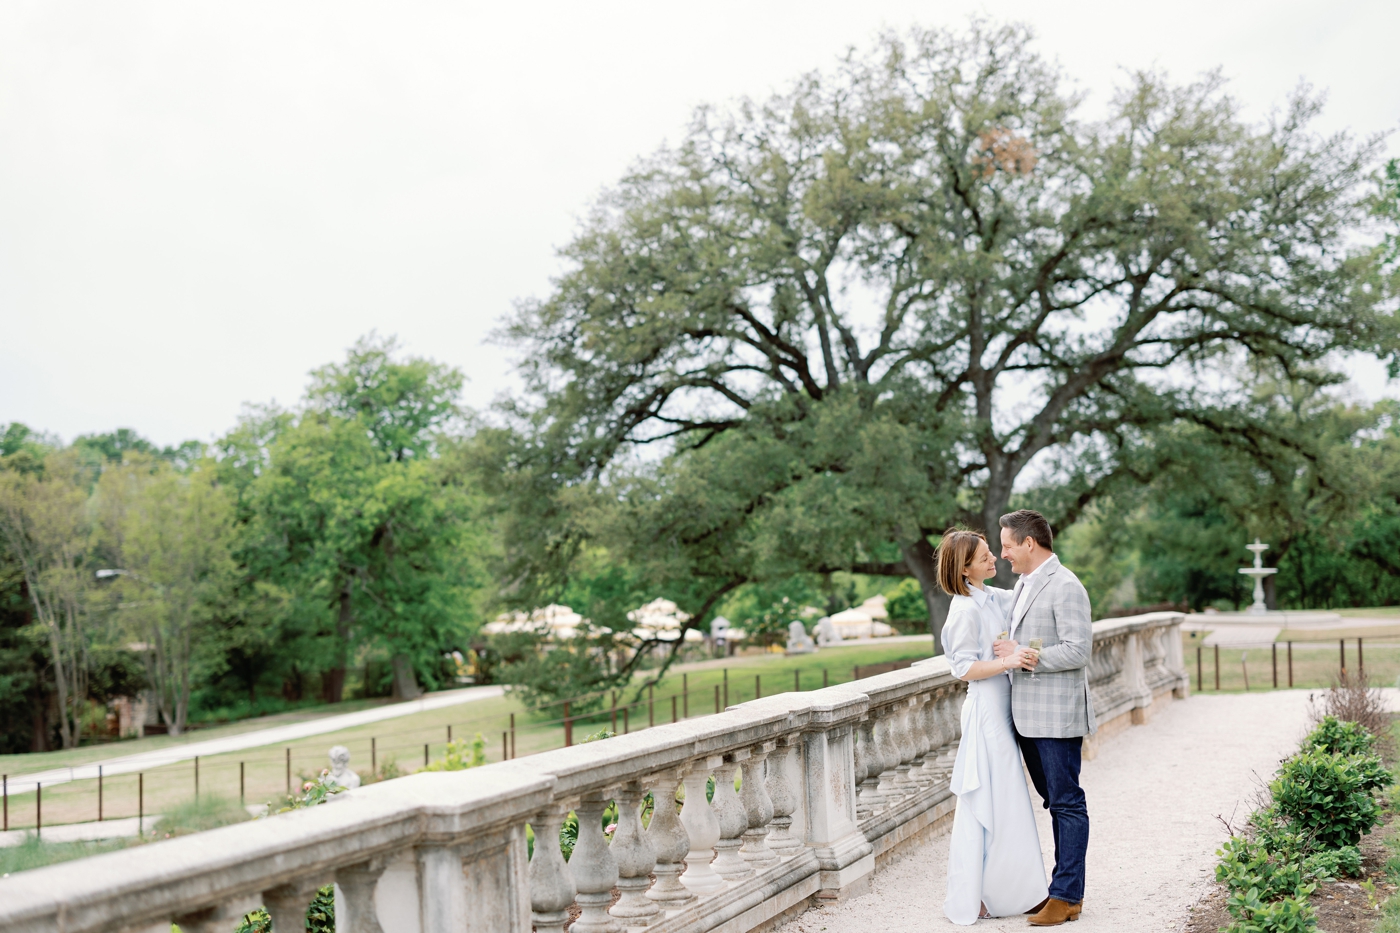 Engagement session at Commodore Perry Estate in Austin, Texas